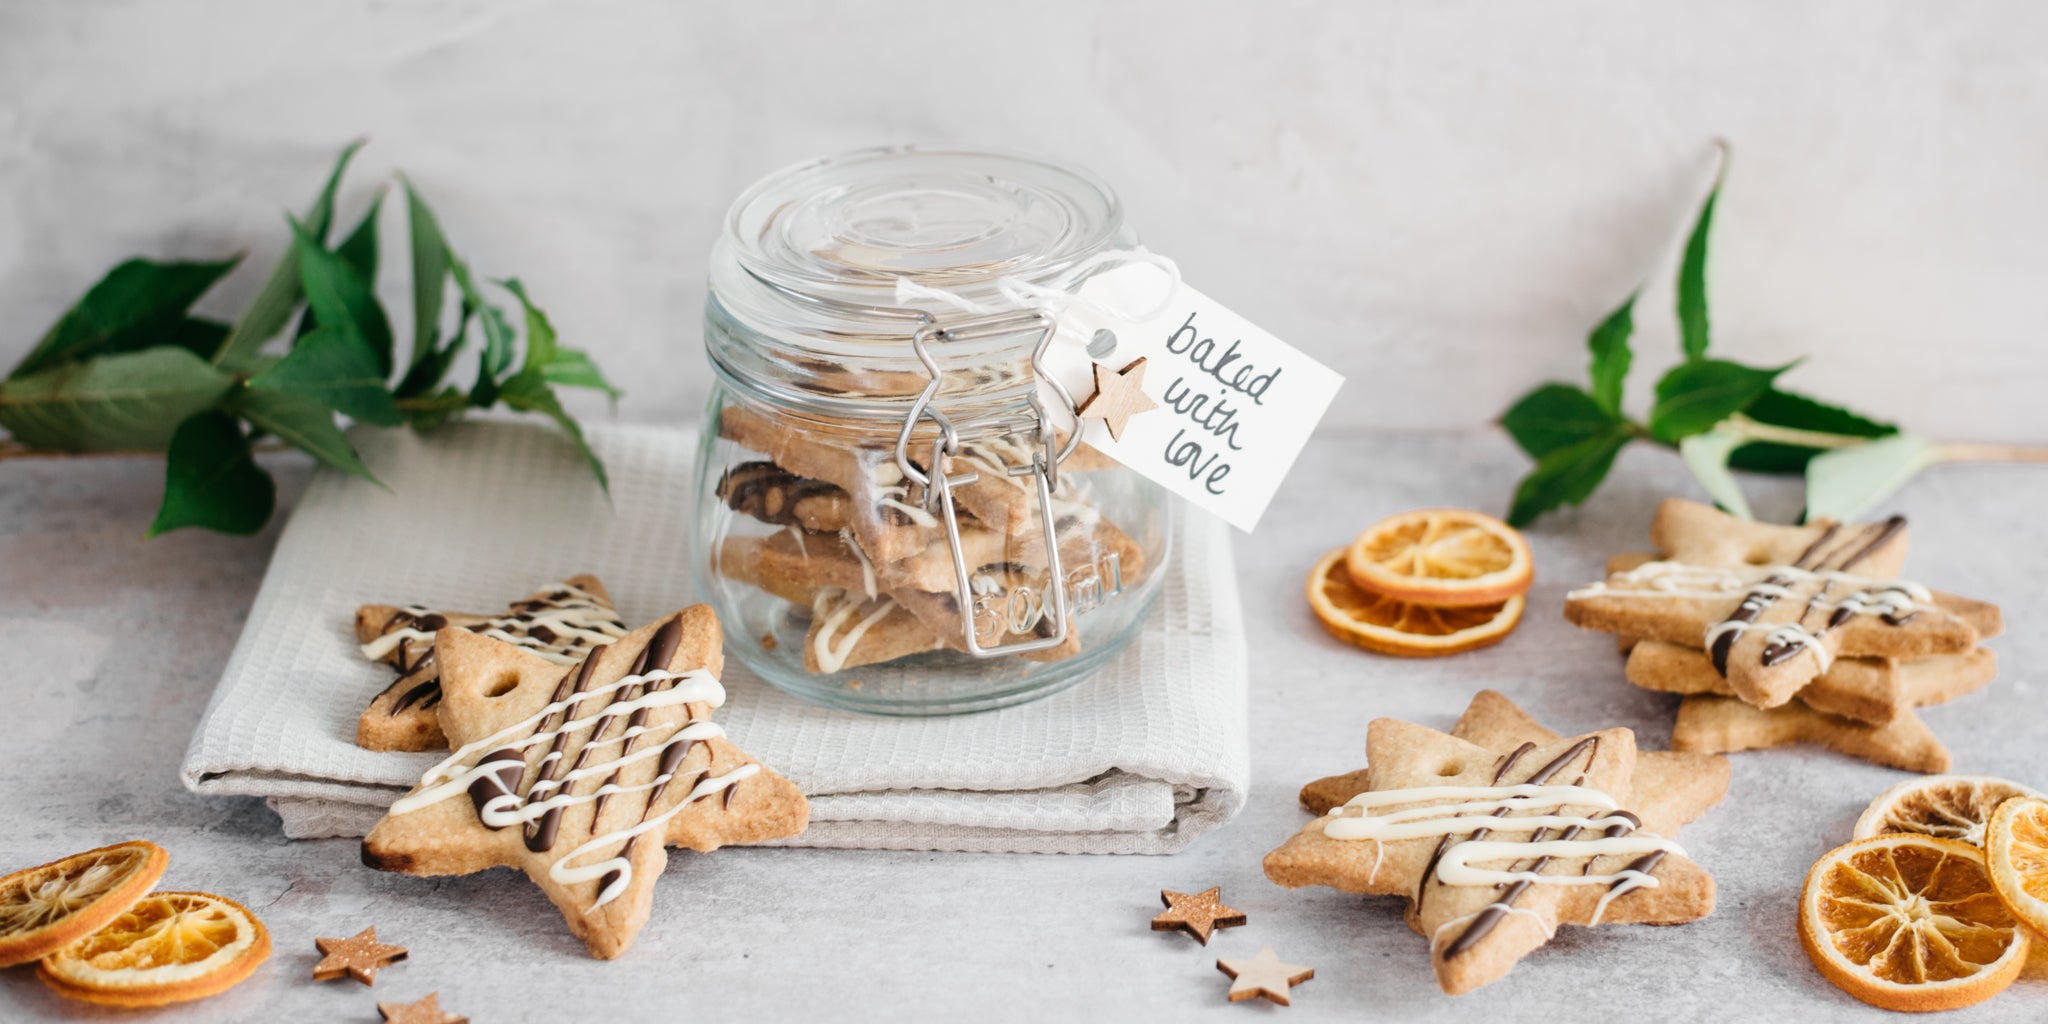 Orange & Ginger shortbread stars in a jar with a hand written note, as a gift at Christmas. Next to sliced orange and star biscuits drizzled in chocolate